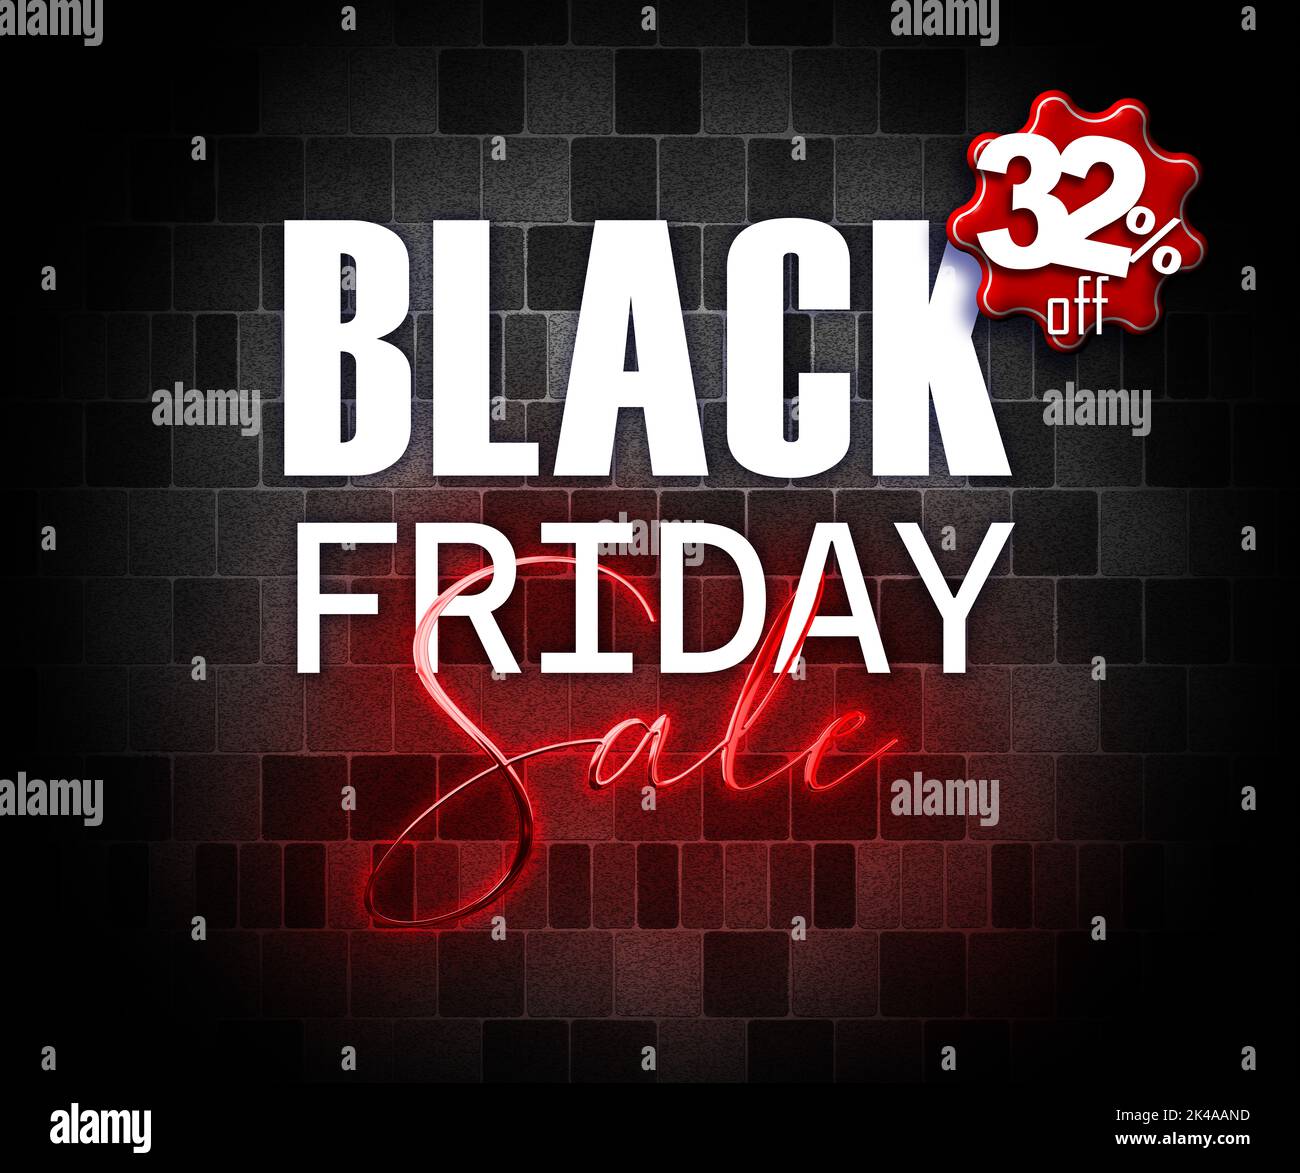 illustration with 3d elements black friday promotion banner 32 percent off sales increase Stock Photo